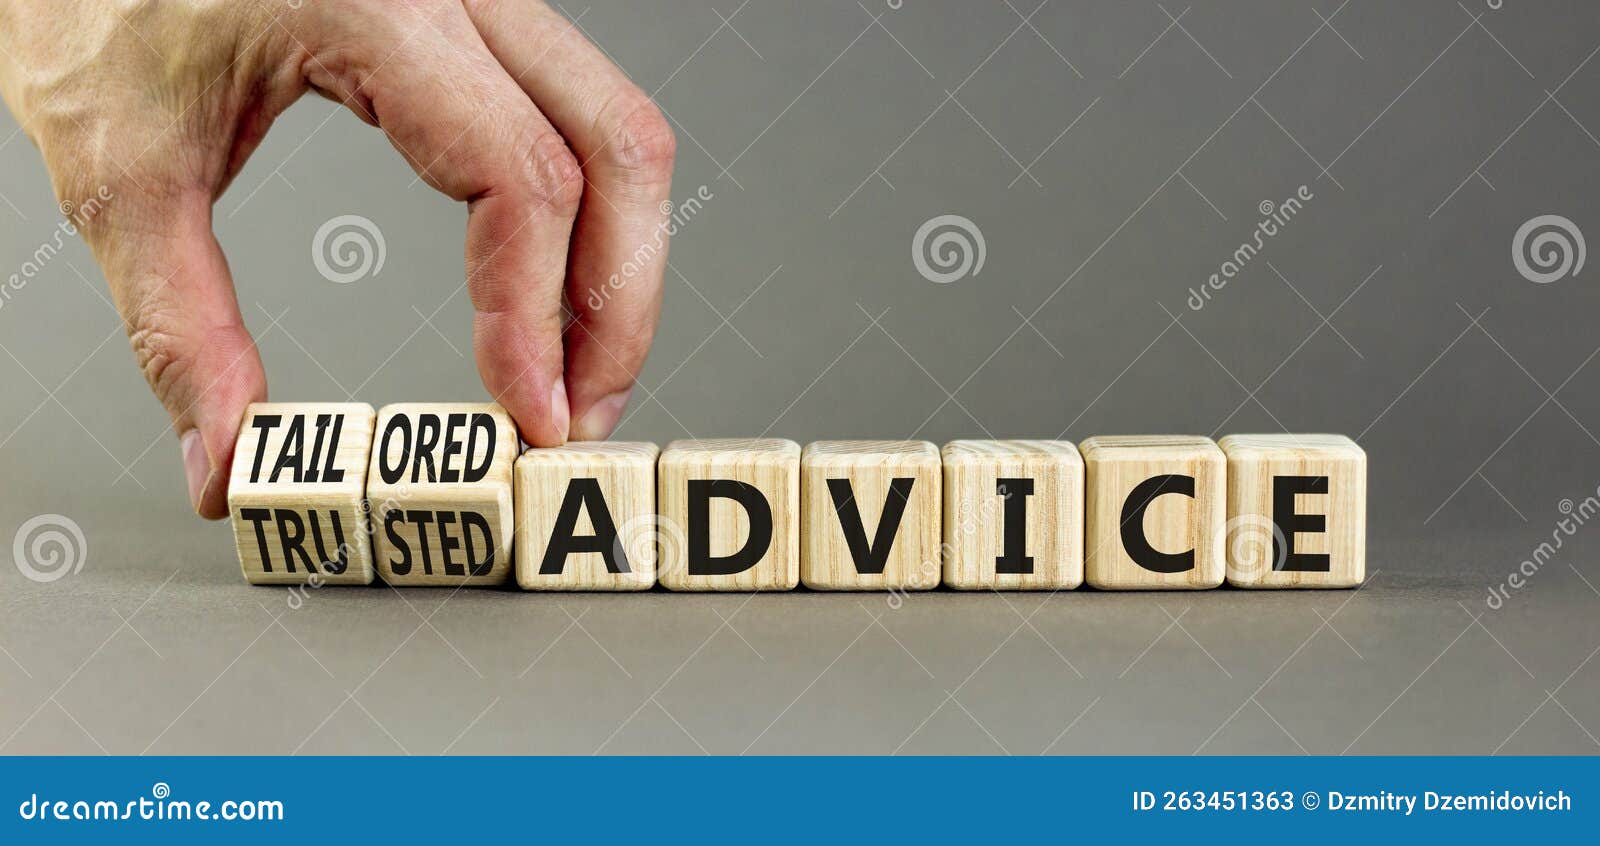 tailored or trusted advice . concept words tailored advice and trusted advice on wooden cubes. businessman hand. beautiful